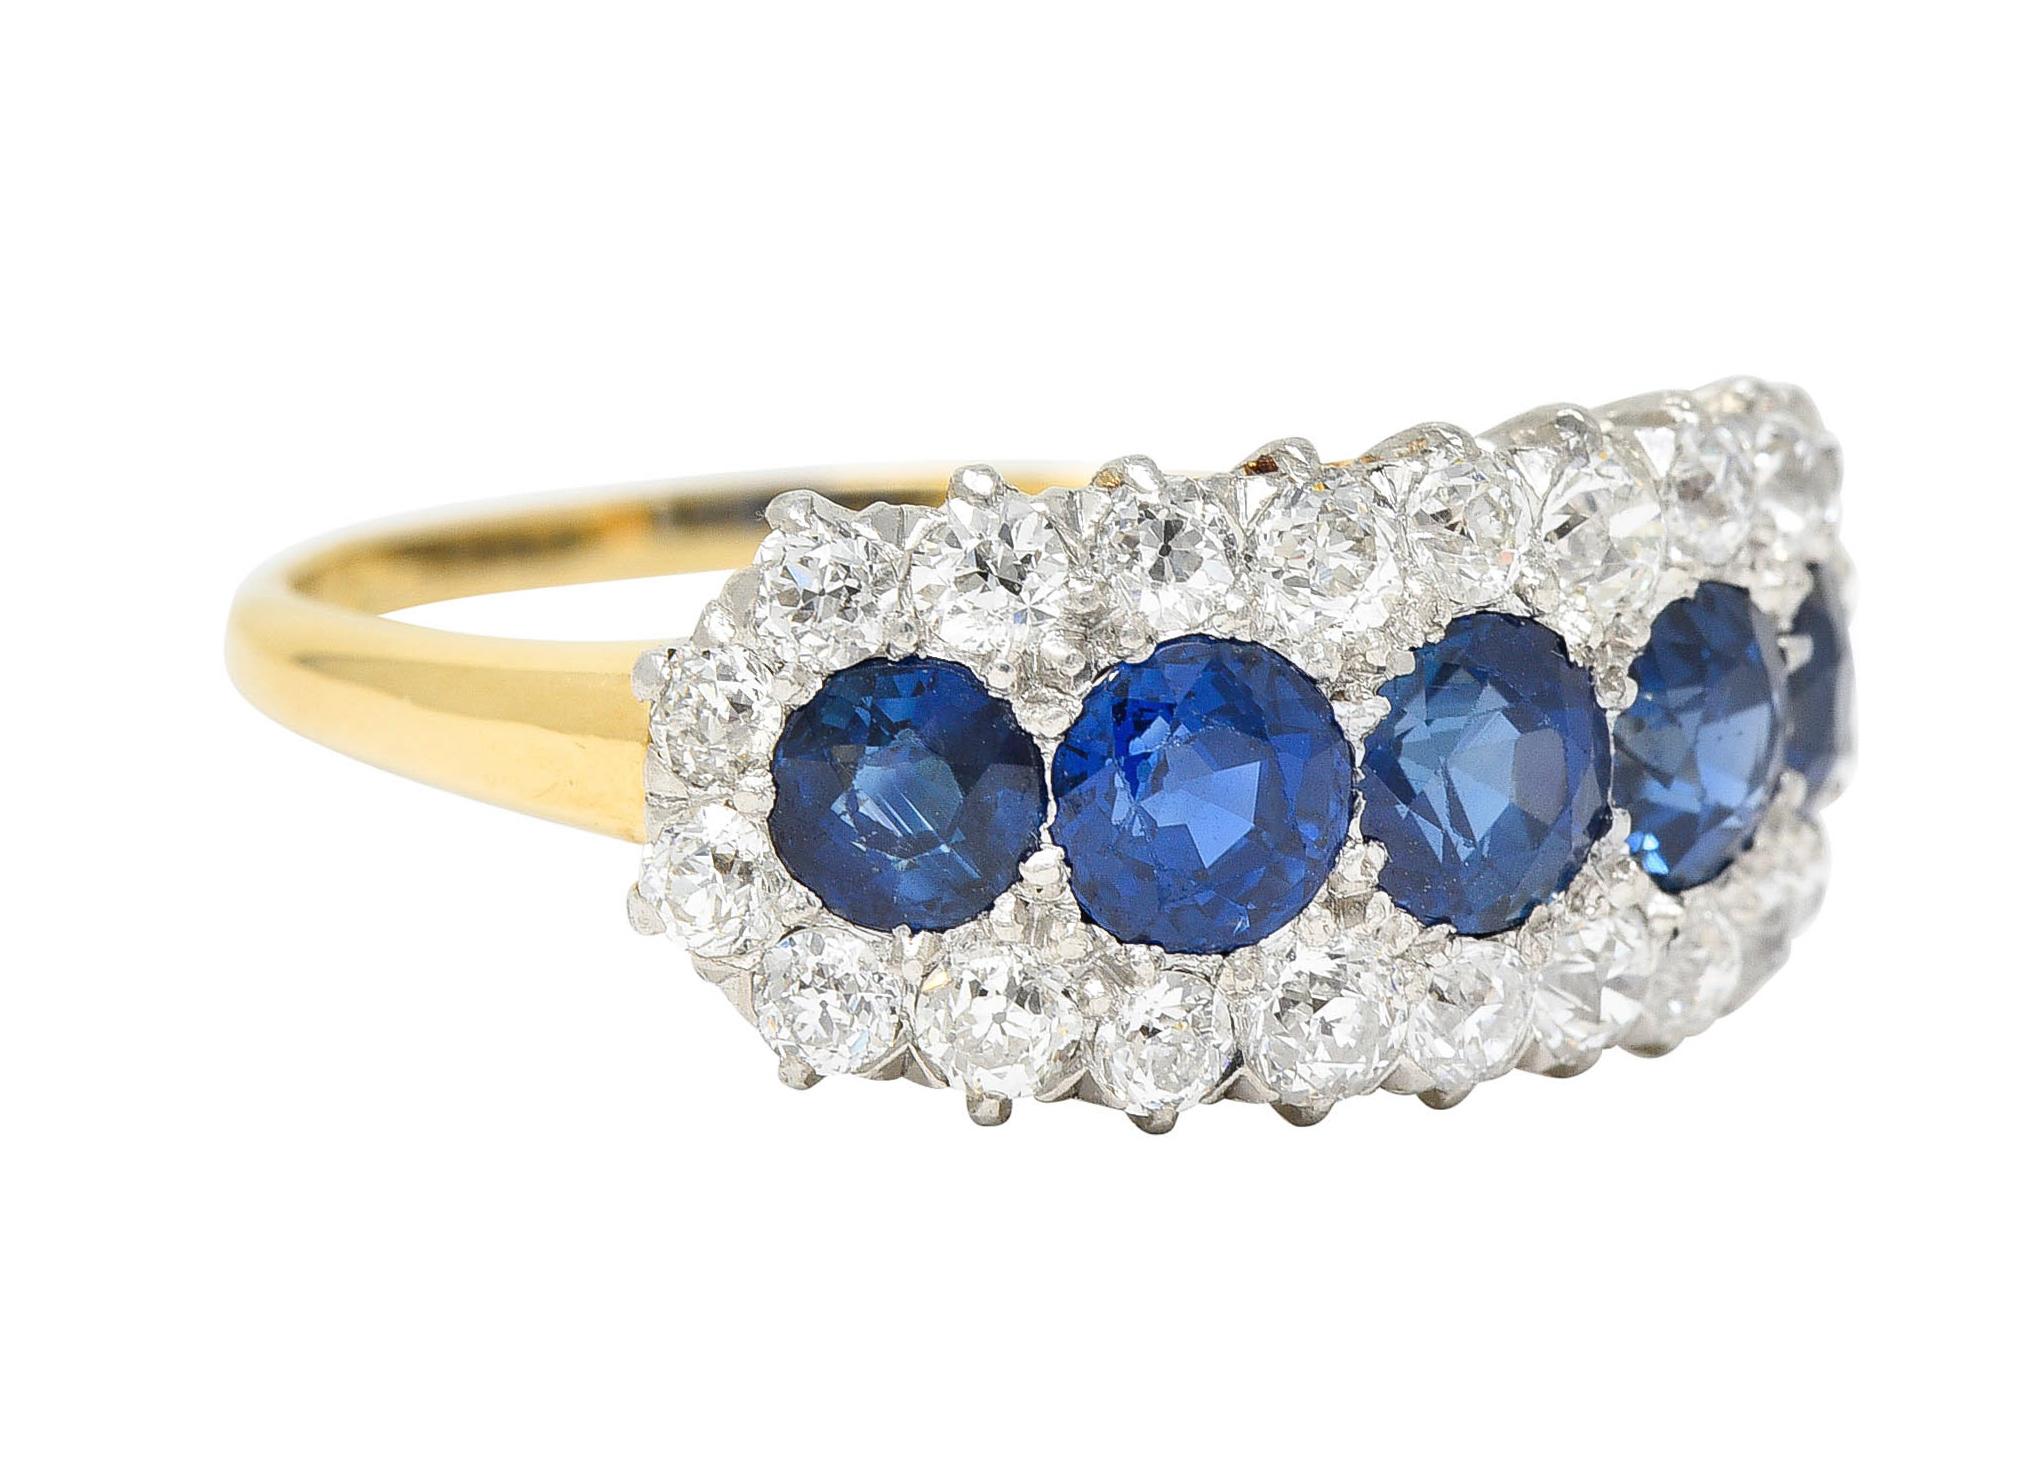 Designed as an elongated East to West cluster that features five round cut sapphires

All are a very well matched bright royal blue while weighing in total approximately 2.70 carats

Surrounded by an old European cut diamond halo - set in